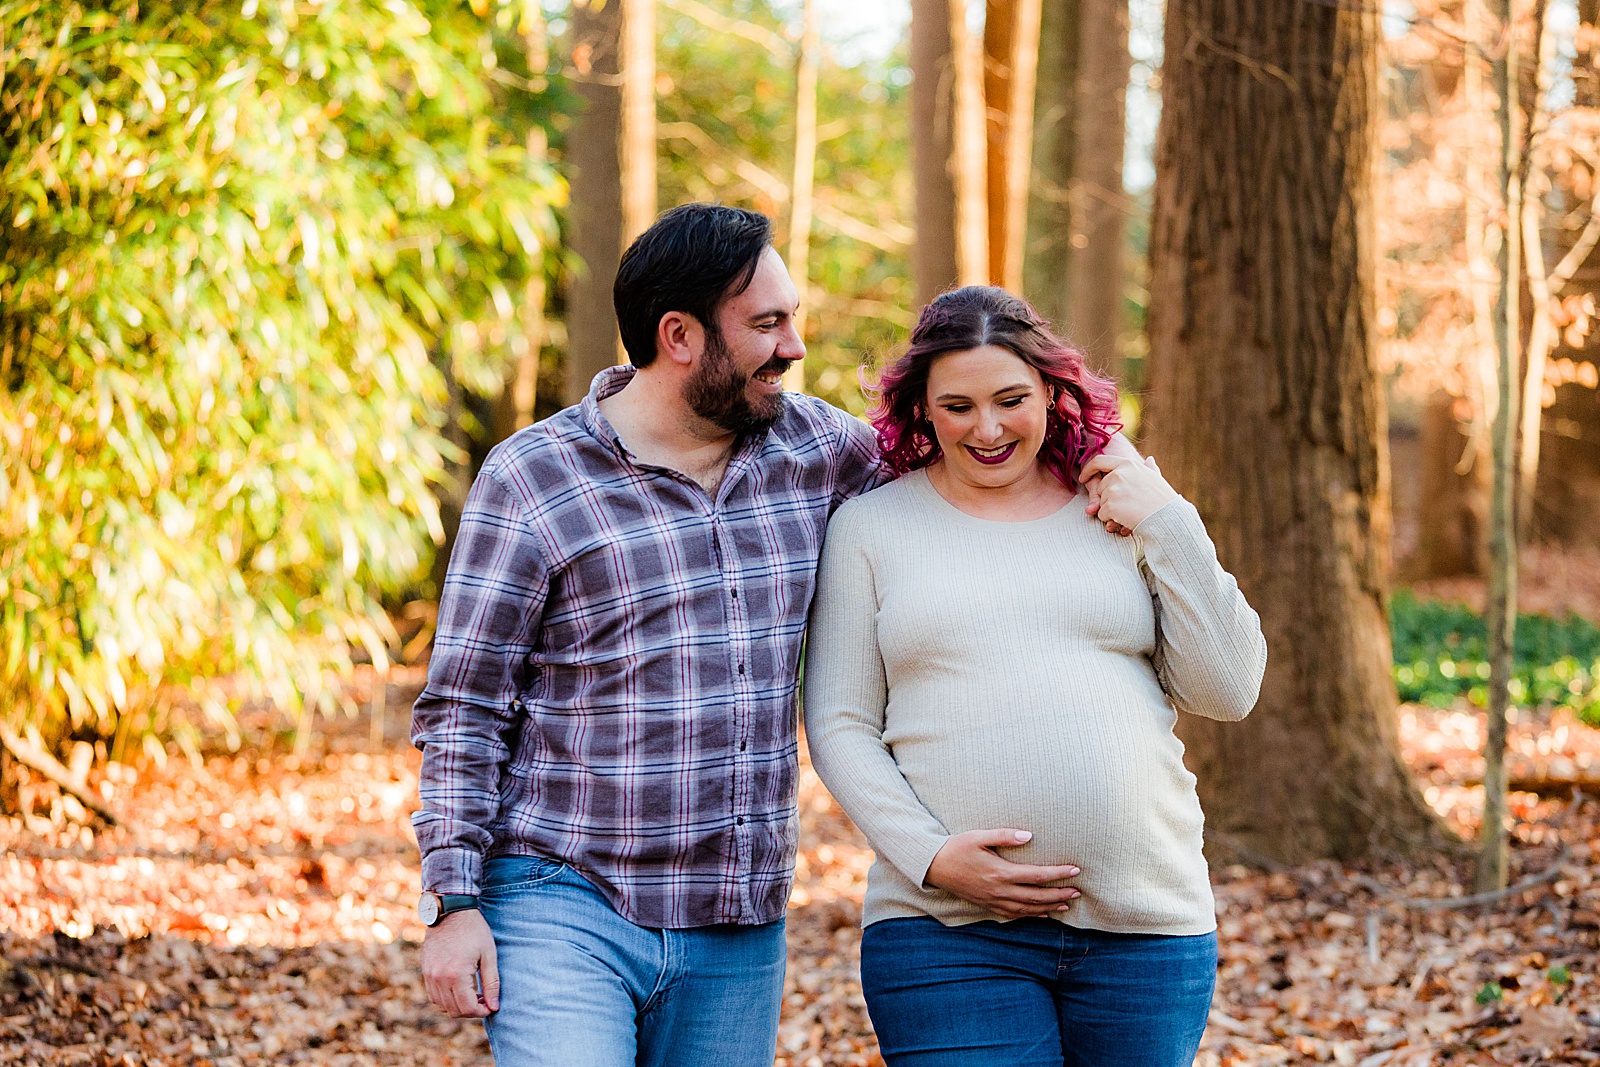 Married couple walks through backyard forest while holding pregnant belly.